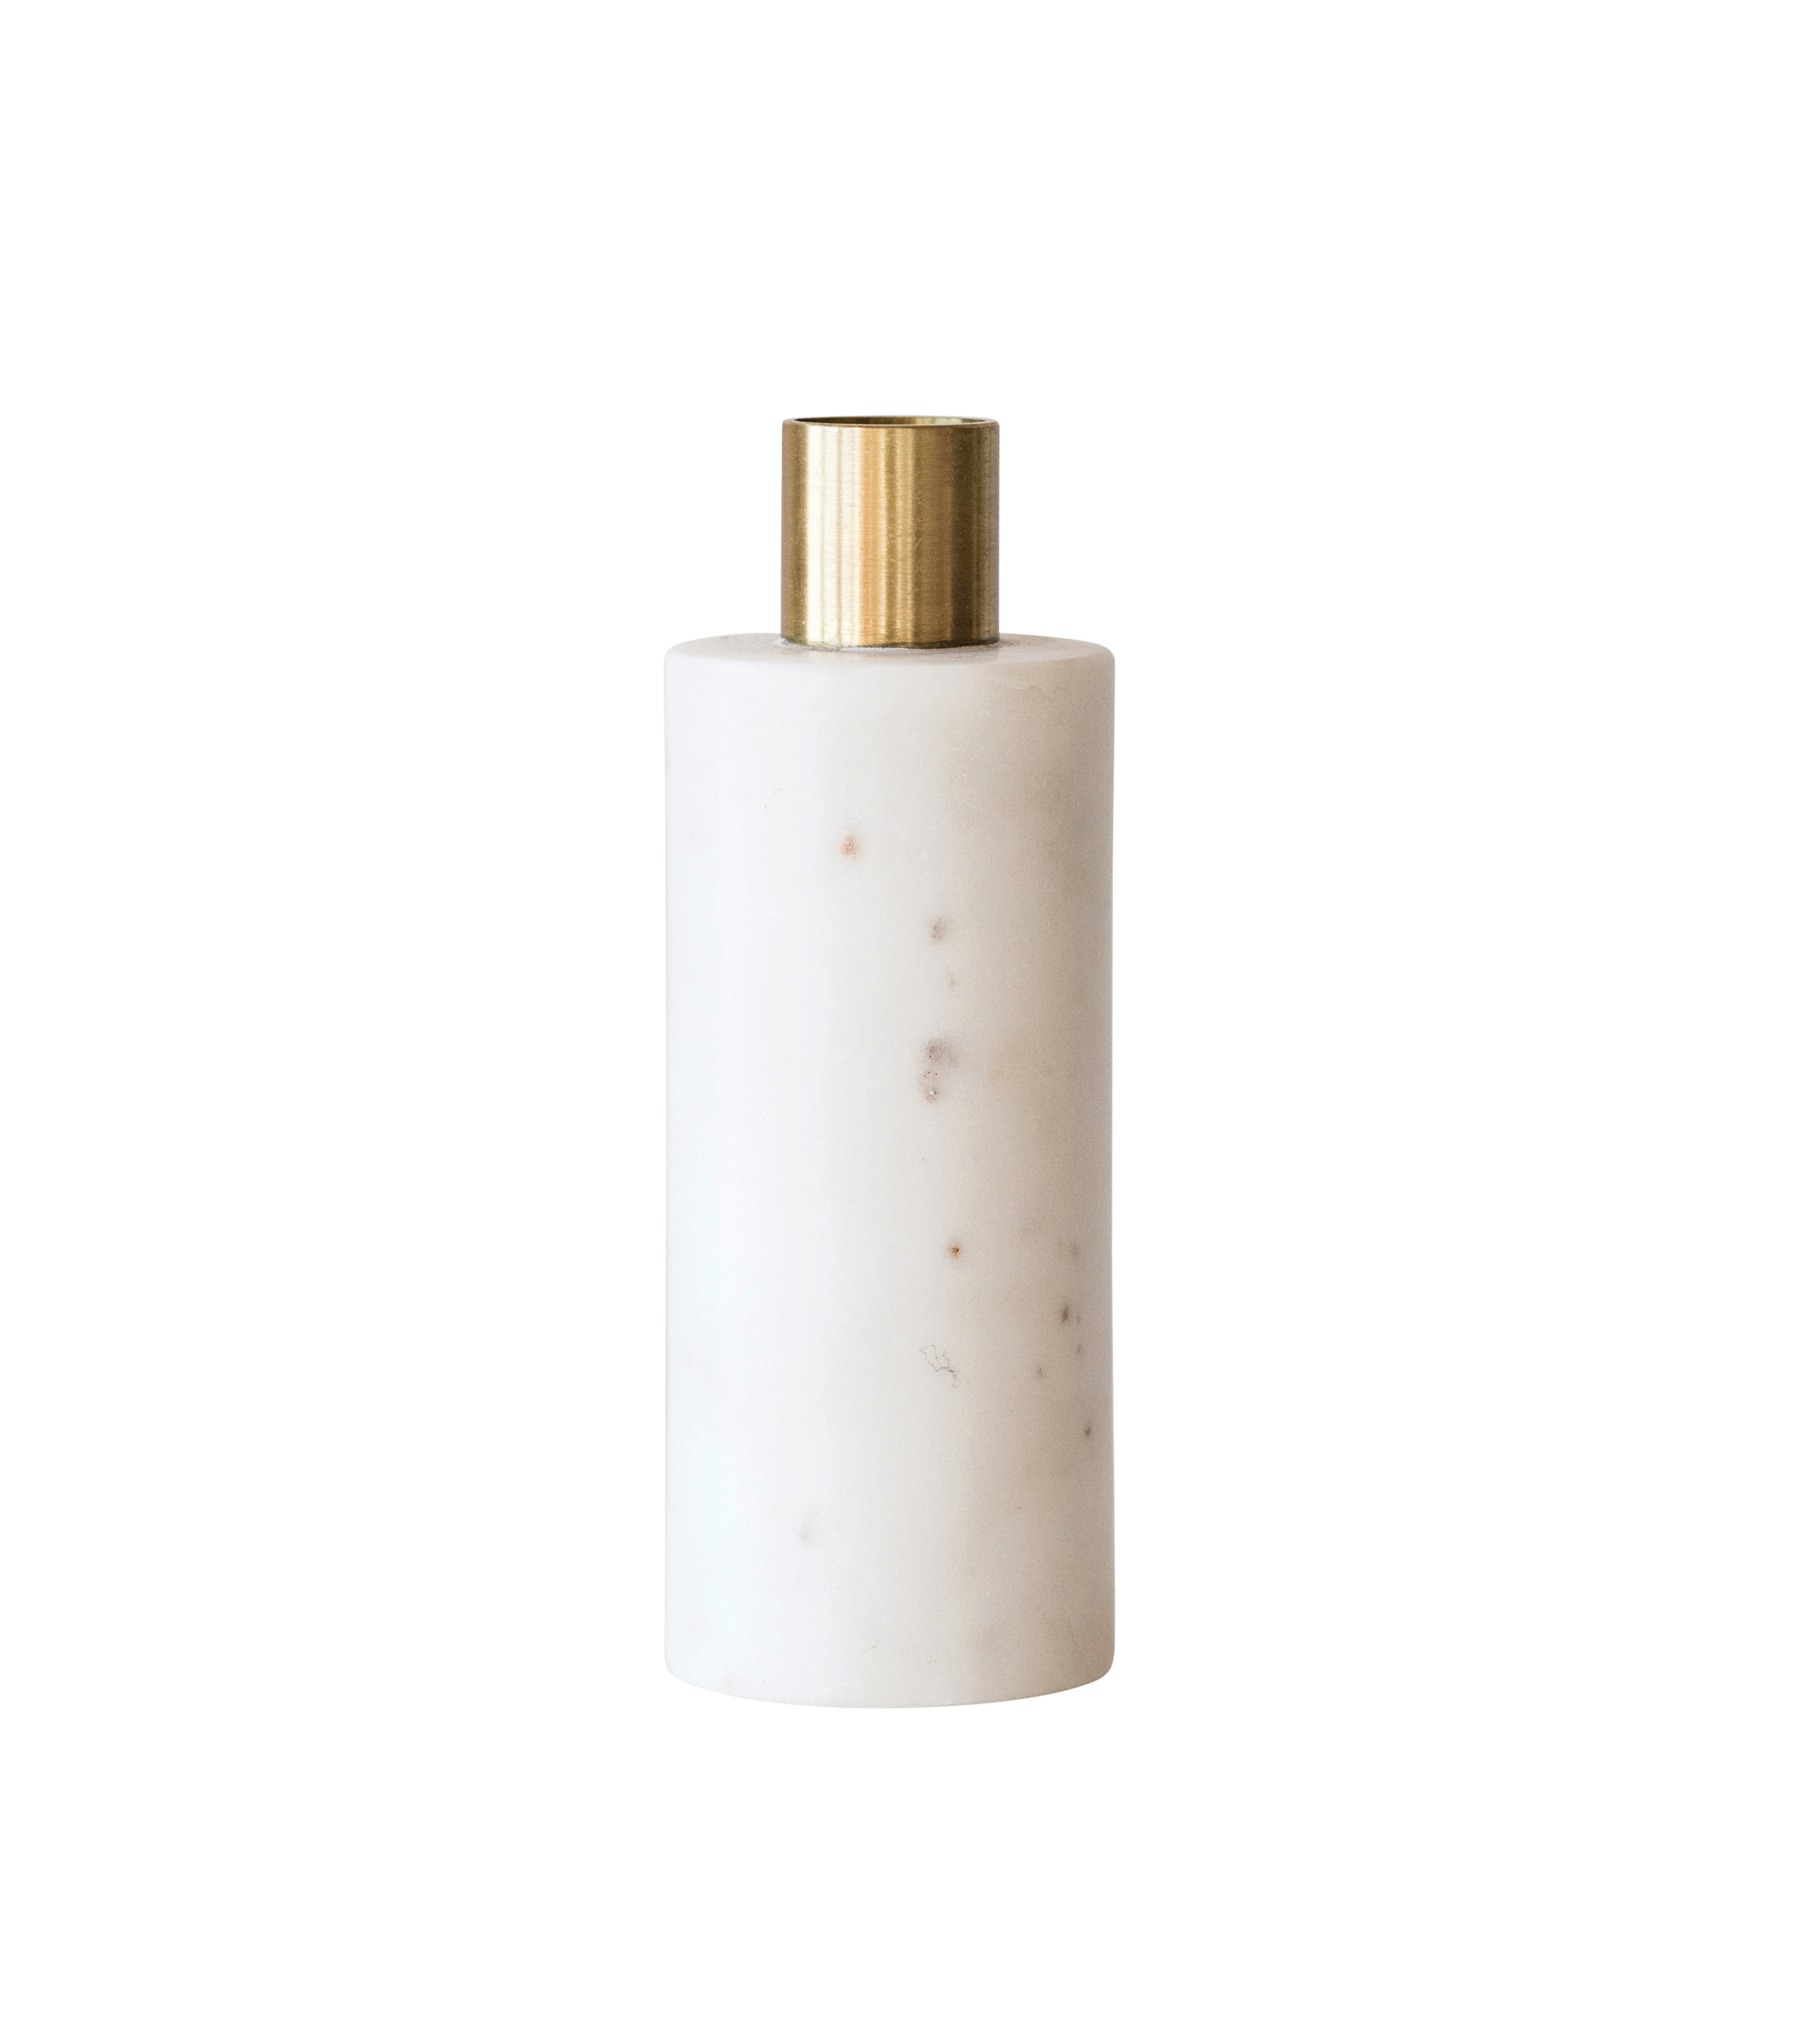 Tall Marble Taper Candle Holder, White & Brass - Moss & Wilder